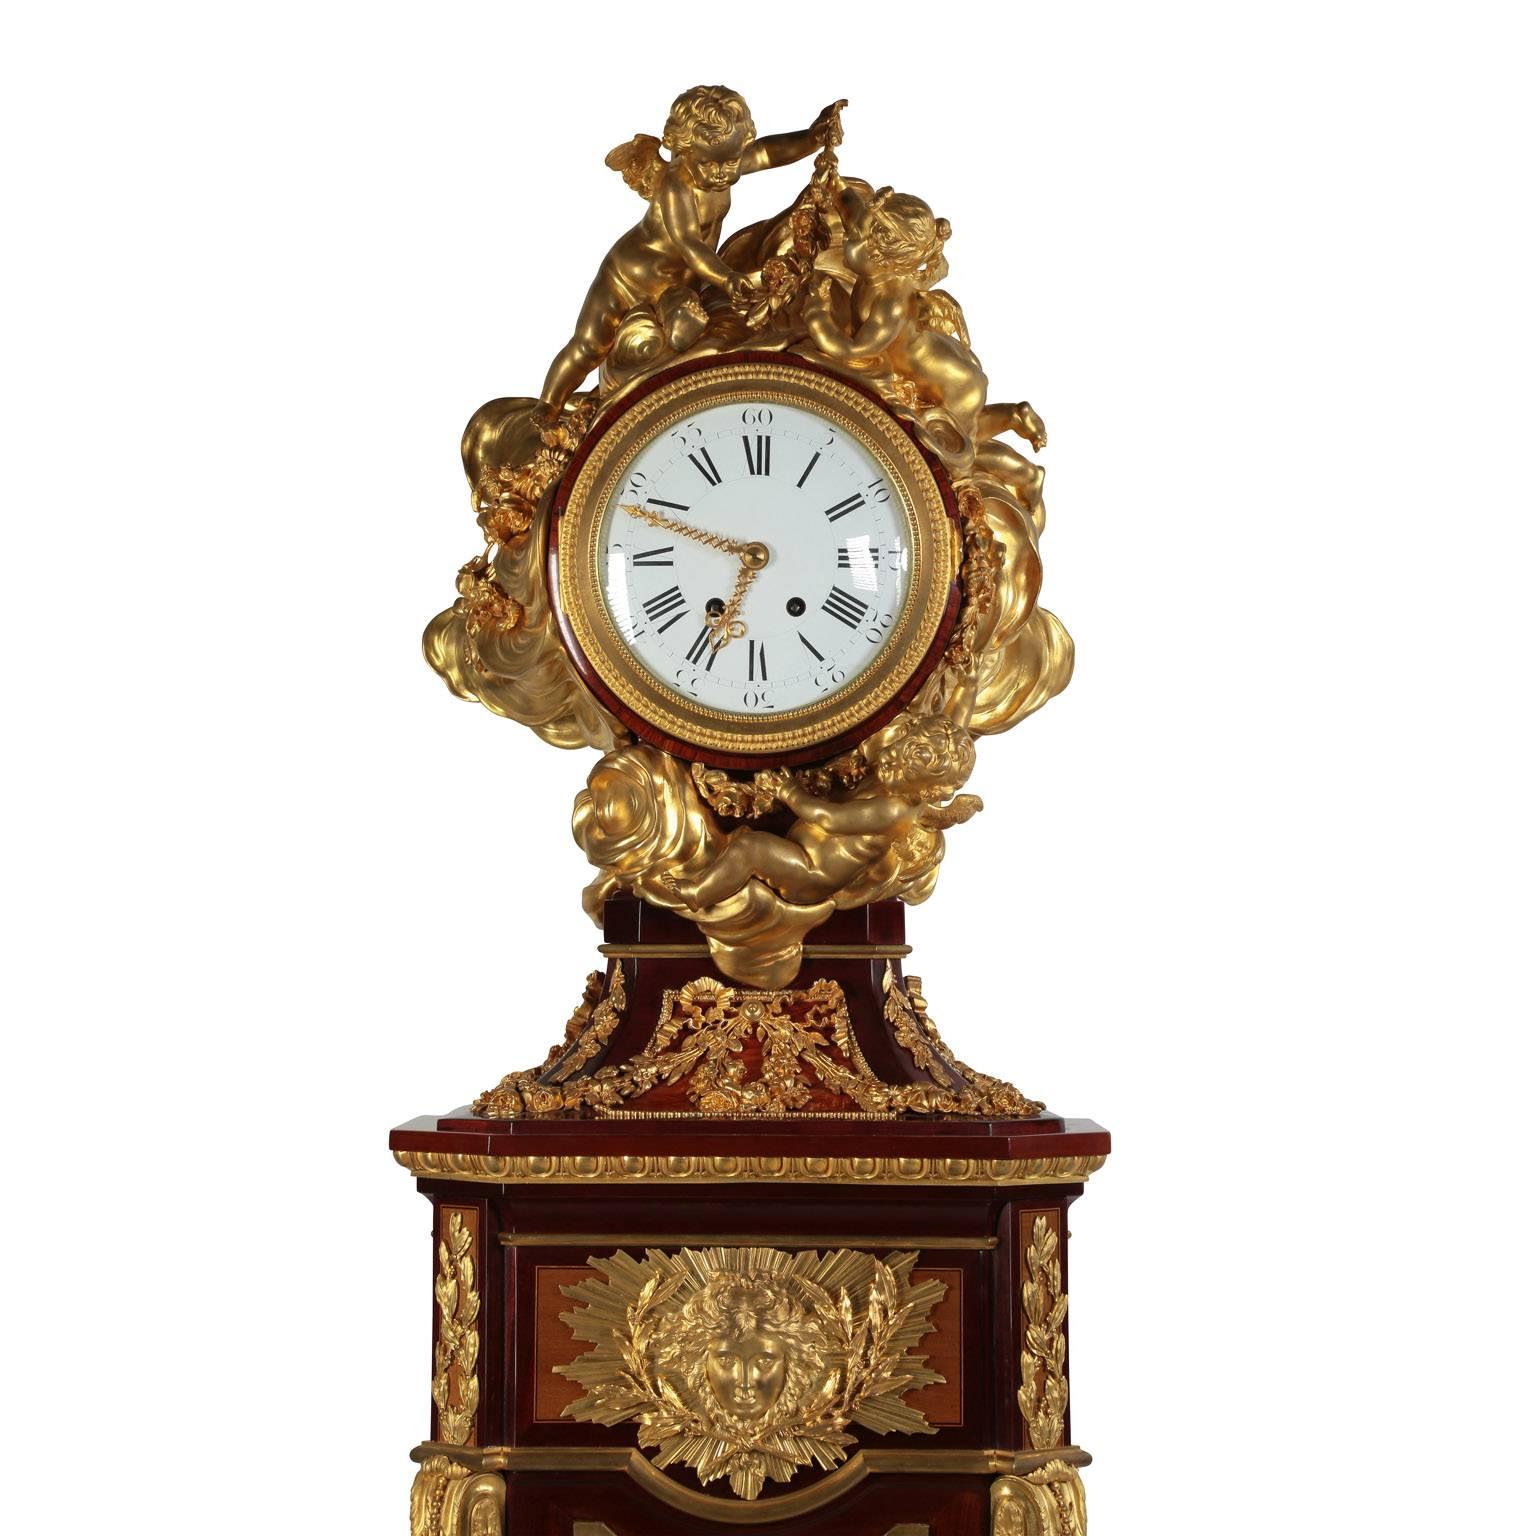 A very fine French 19th Century Louis XVI style ormolu-mounted amaranth, tulipwood, sycamore and parquetry pedestal Régulateur de Parquet Tall Case Clock, Attributed to Alfred Emmanuel Louis Beurdeley (French, 1847-1919) After the model attributed